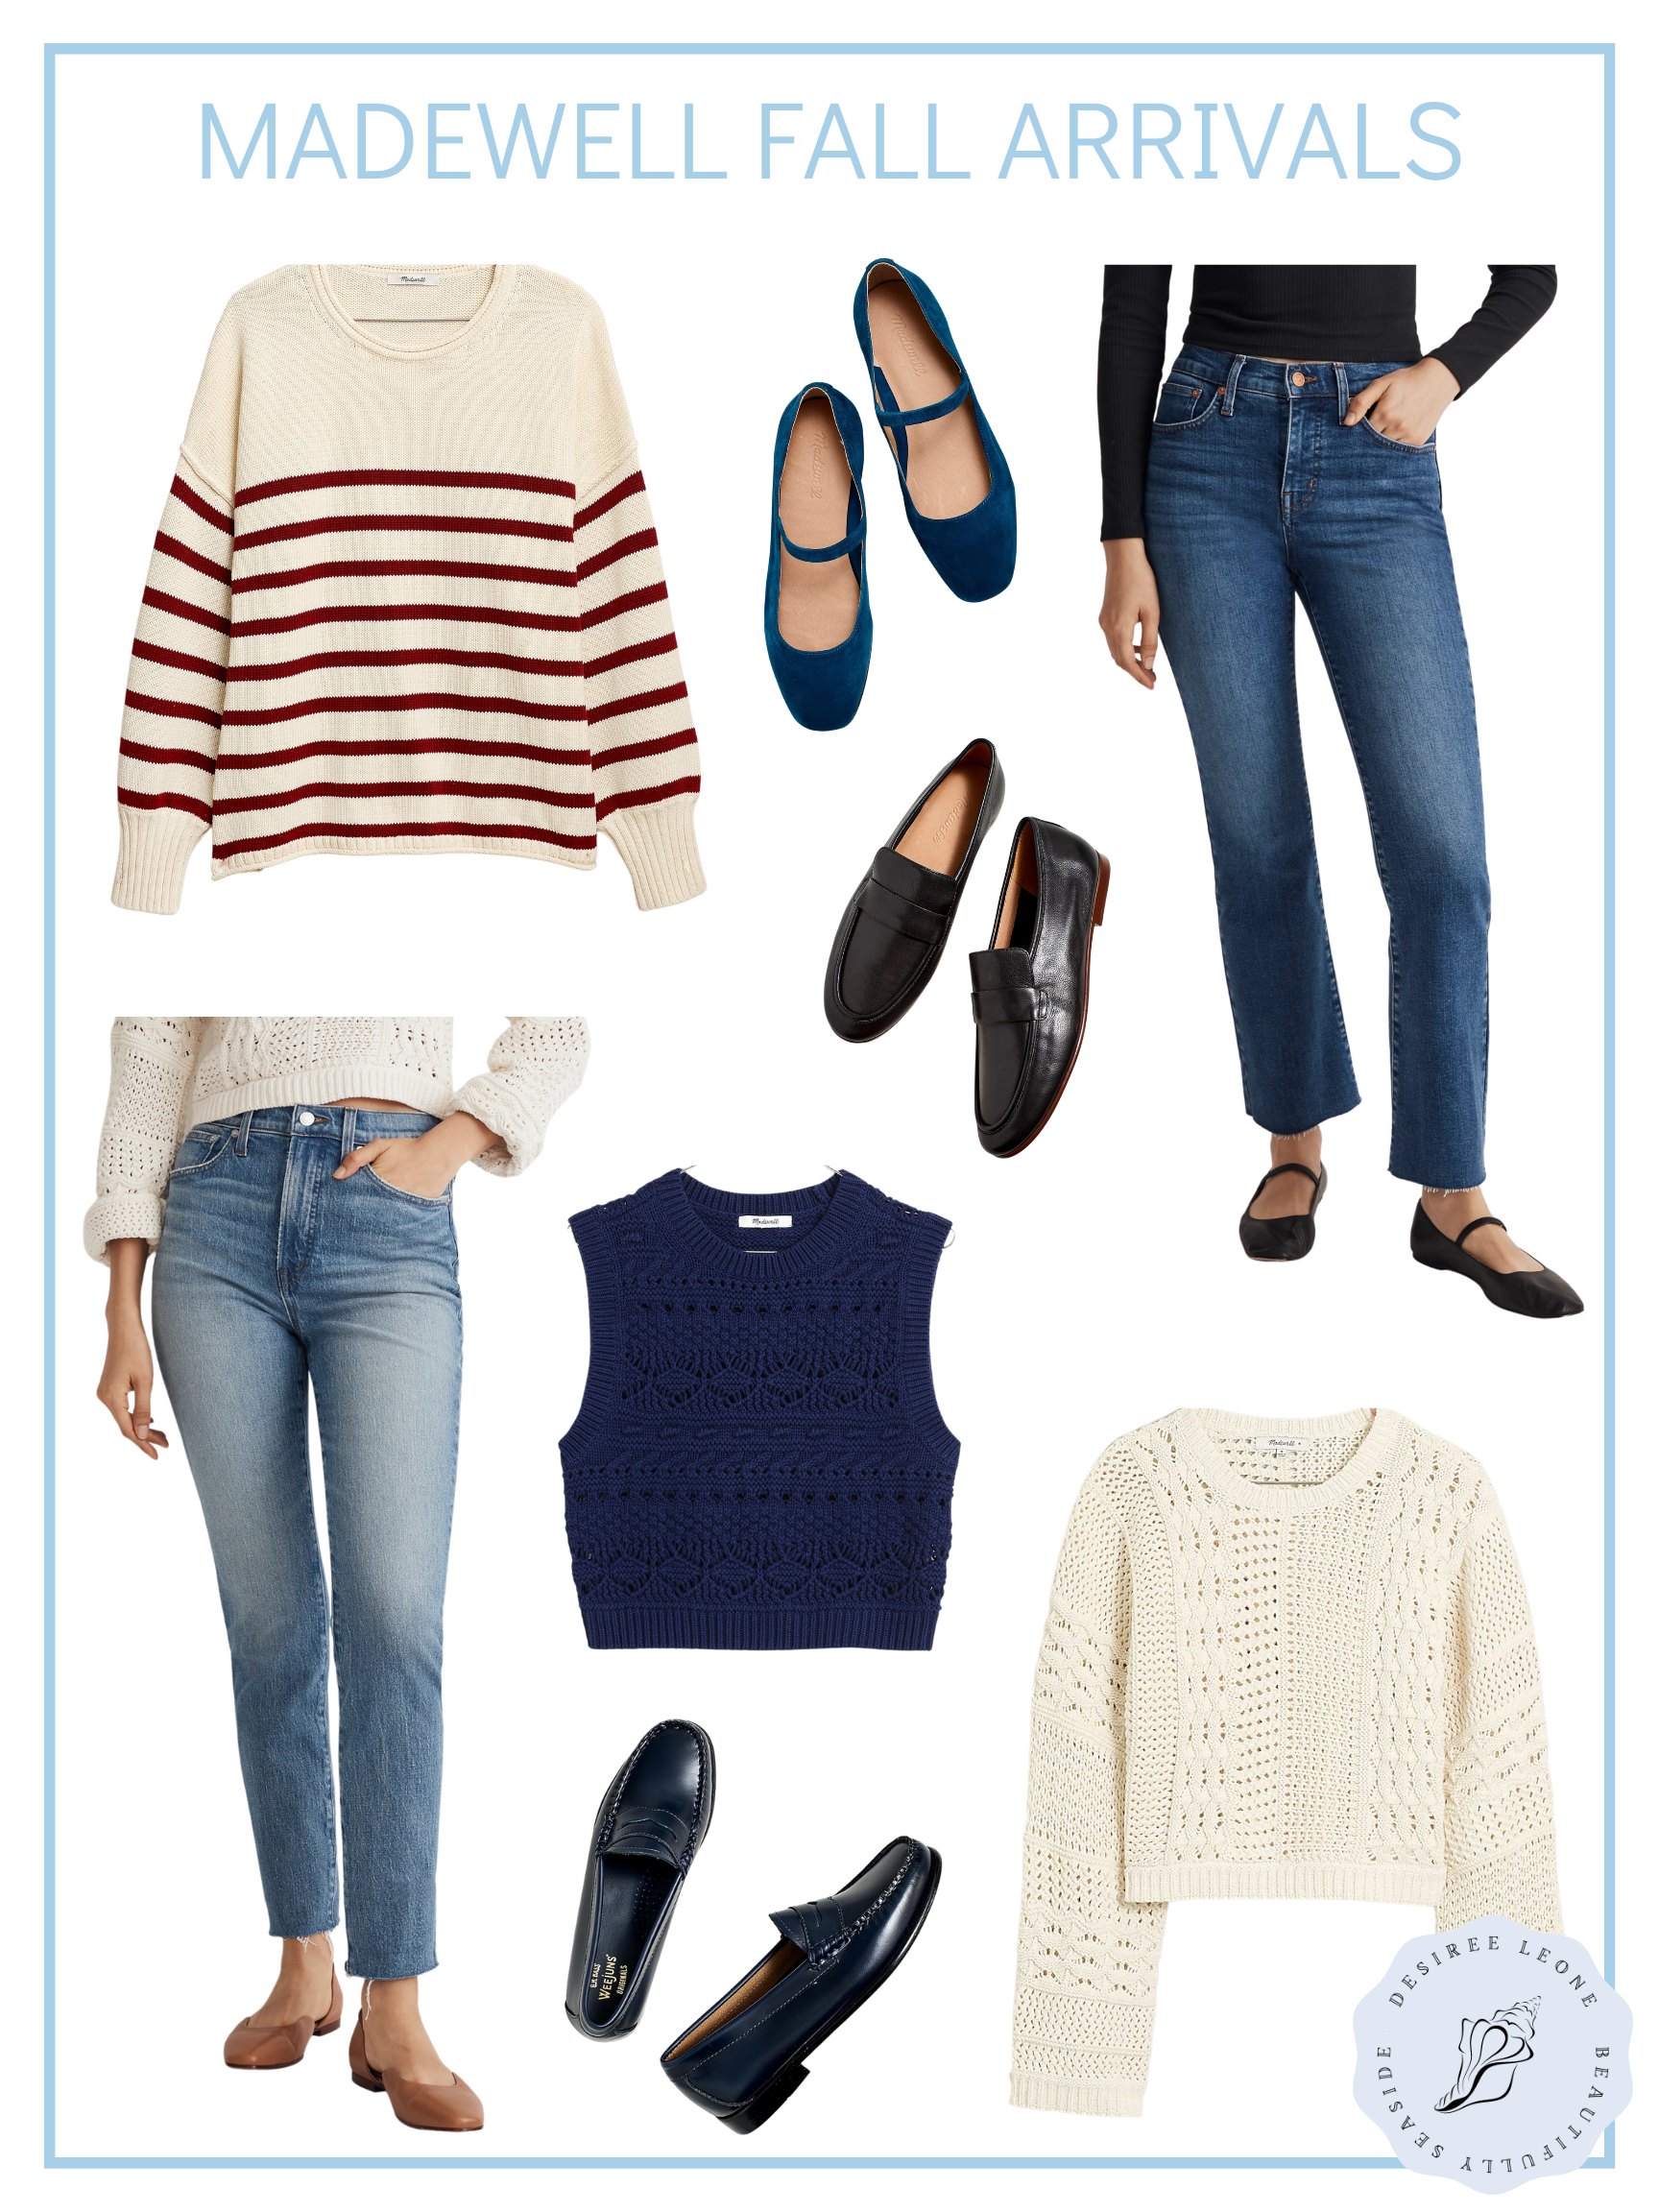 Desiree Leone of Beautifully Seaside is embracing cozy style this fall with these new arrivals at Madewell.